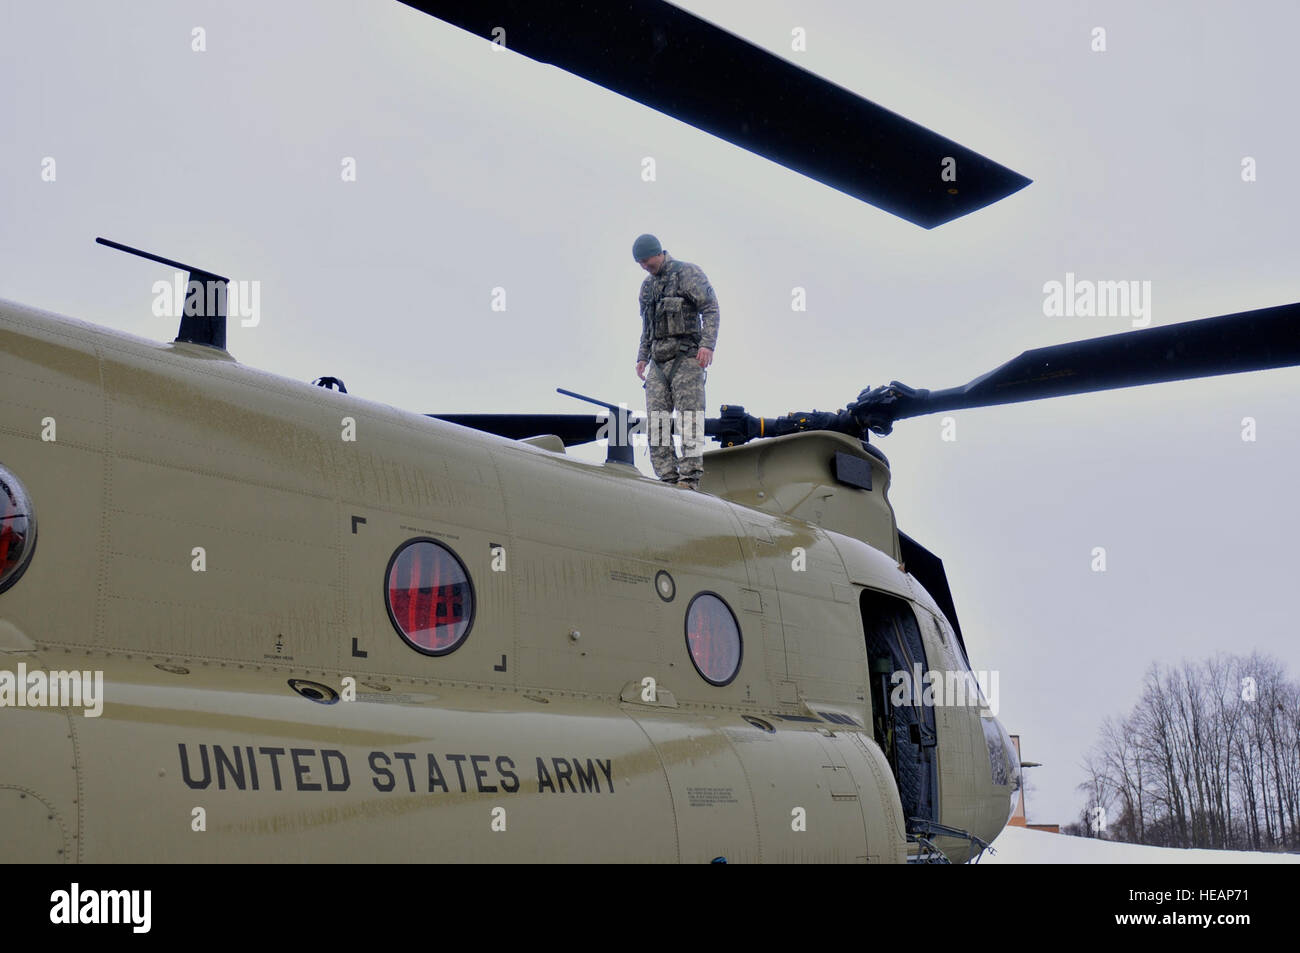 Army Staff Sgt. Mike Landaur completes a safety check of a CH-47F Chinook helicopter March 14, 2015. Staff Sgt. Landaur is a CH-47F crew chief from Company B, 3rd Battalion, 126th Aviation based at the Army Aviation Support Facility at Rochester International Airport. Thirty Airmen from the 274th Air Support Operations Squadron (ASOS), based at Hancock Field Air National Guard Base, and the Army aircrew trained together for the first time. The training included Joint Terminal Attack Controller (or JTAC) Airmen from the 274th ASOS conducting CH-47 helicopter familiarization training, safety bri Stock Photo